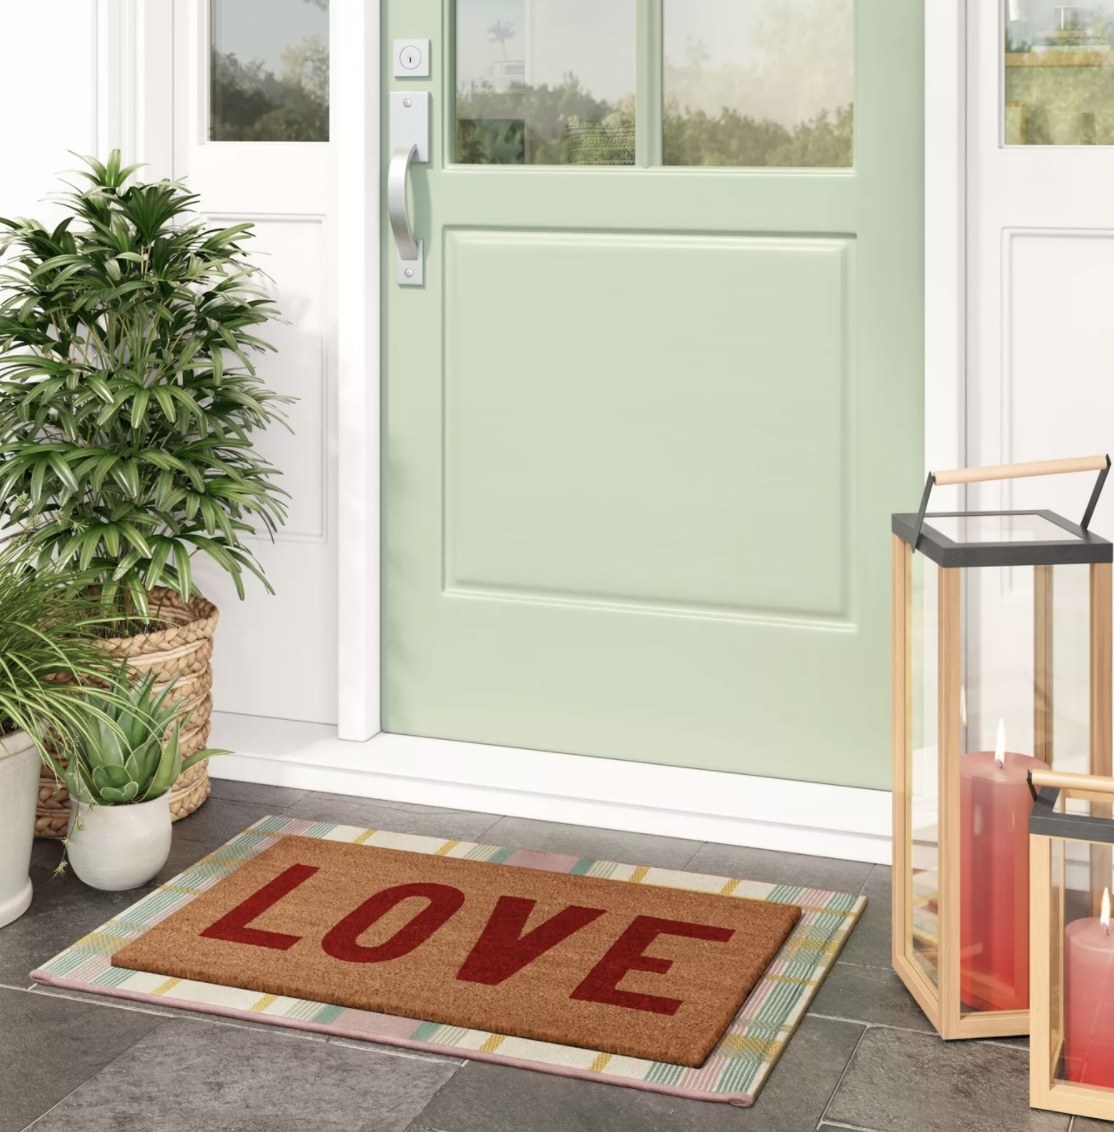 The brown doormat says &quot;LOVE&quot; in large red block letters